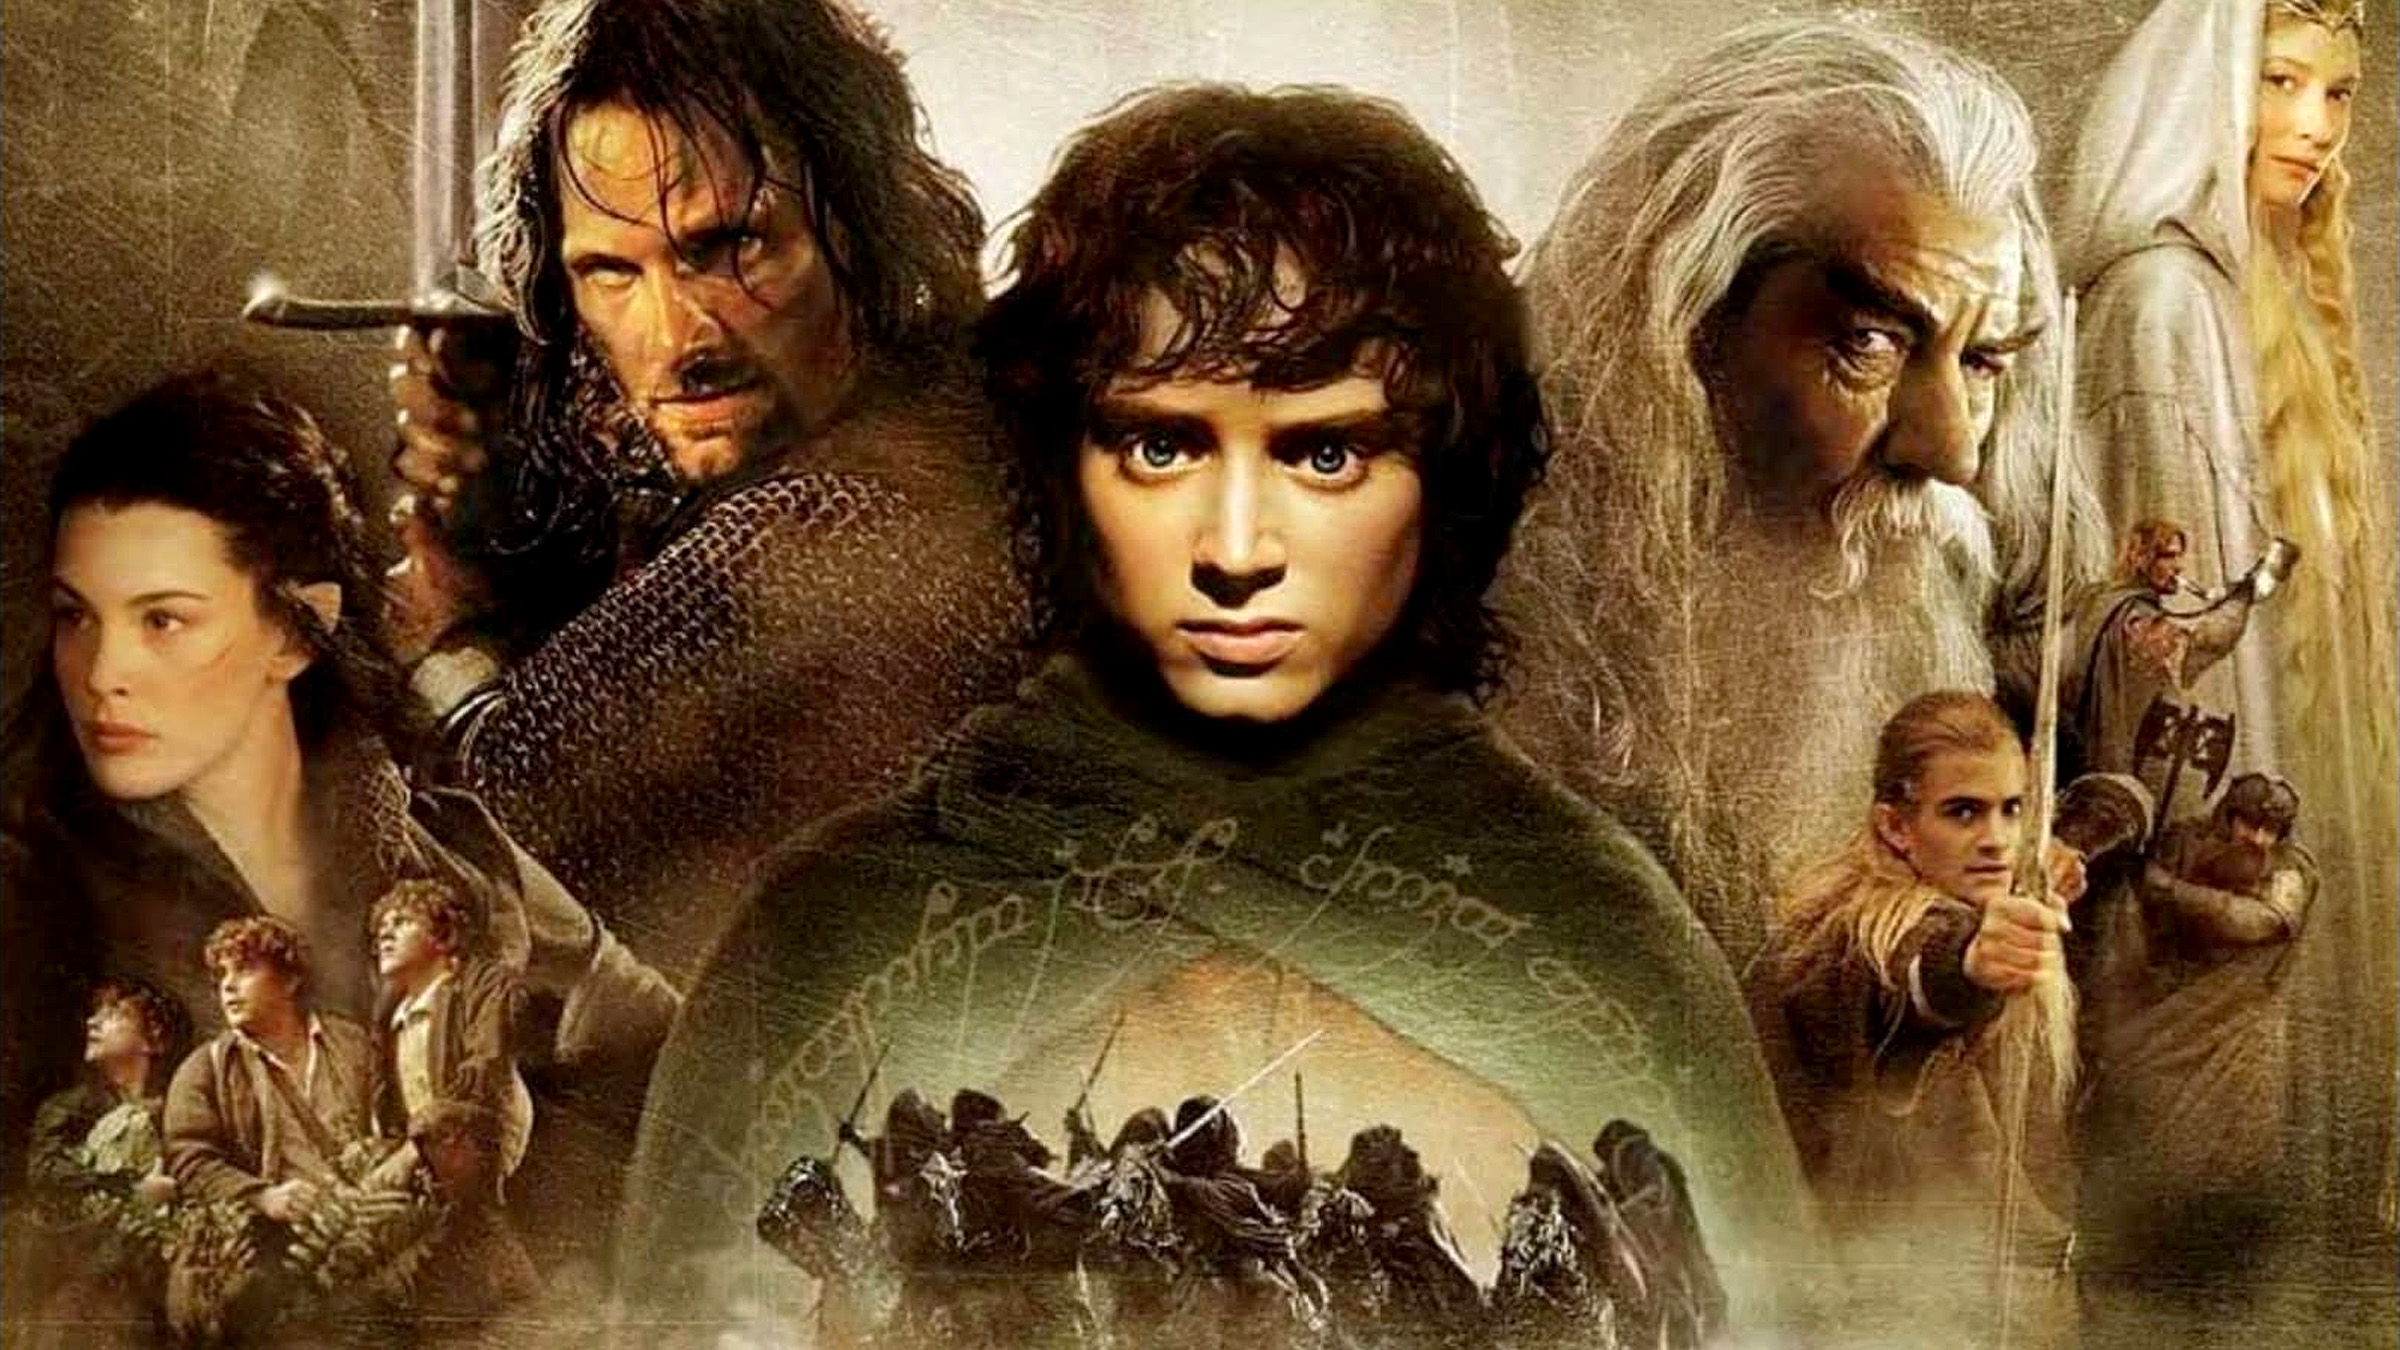 The Lord of the Rings Turns 20: Looking Back on an Epic Cinematic